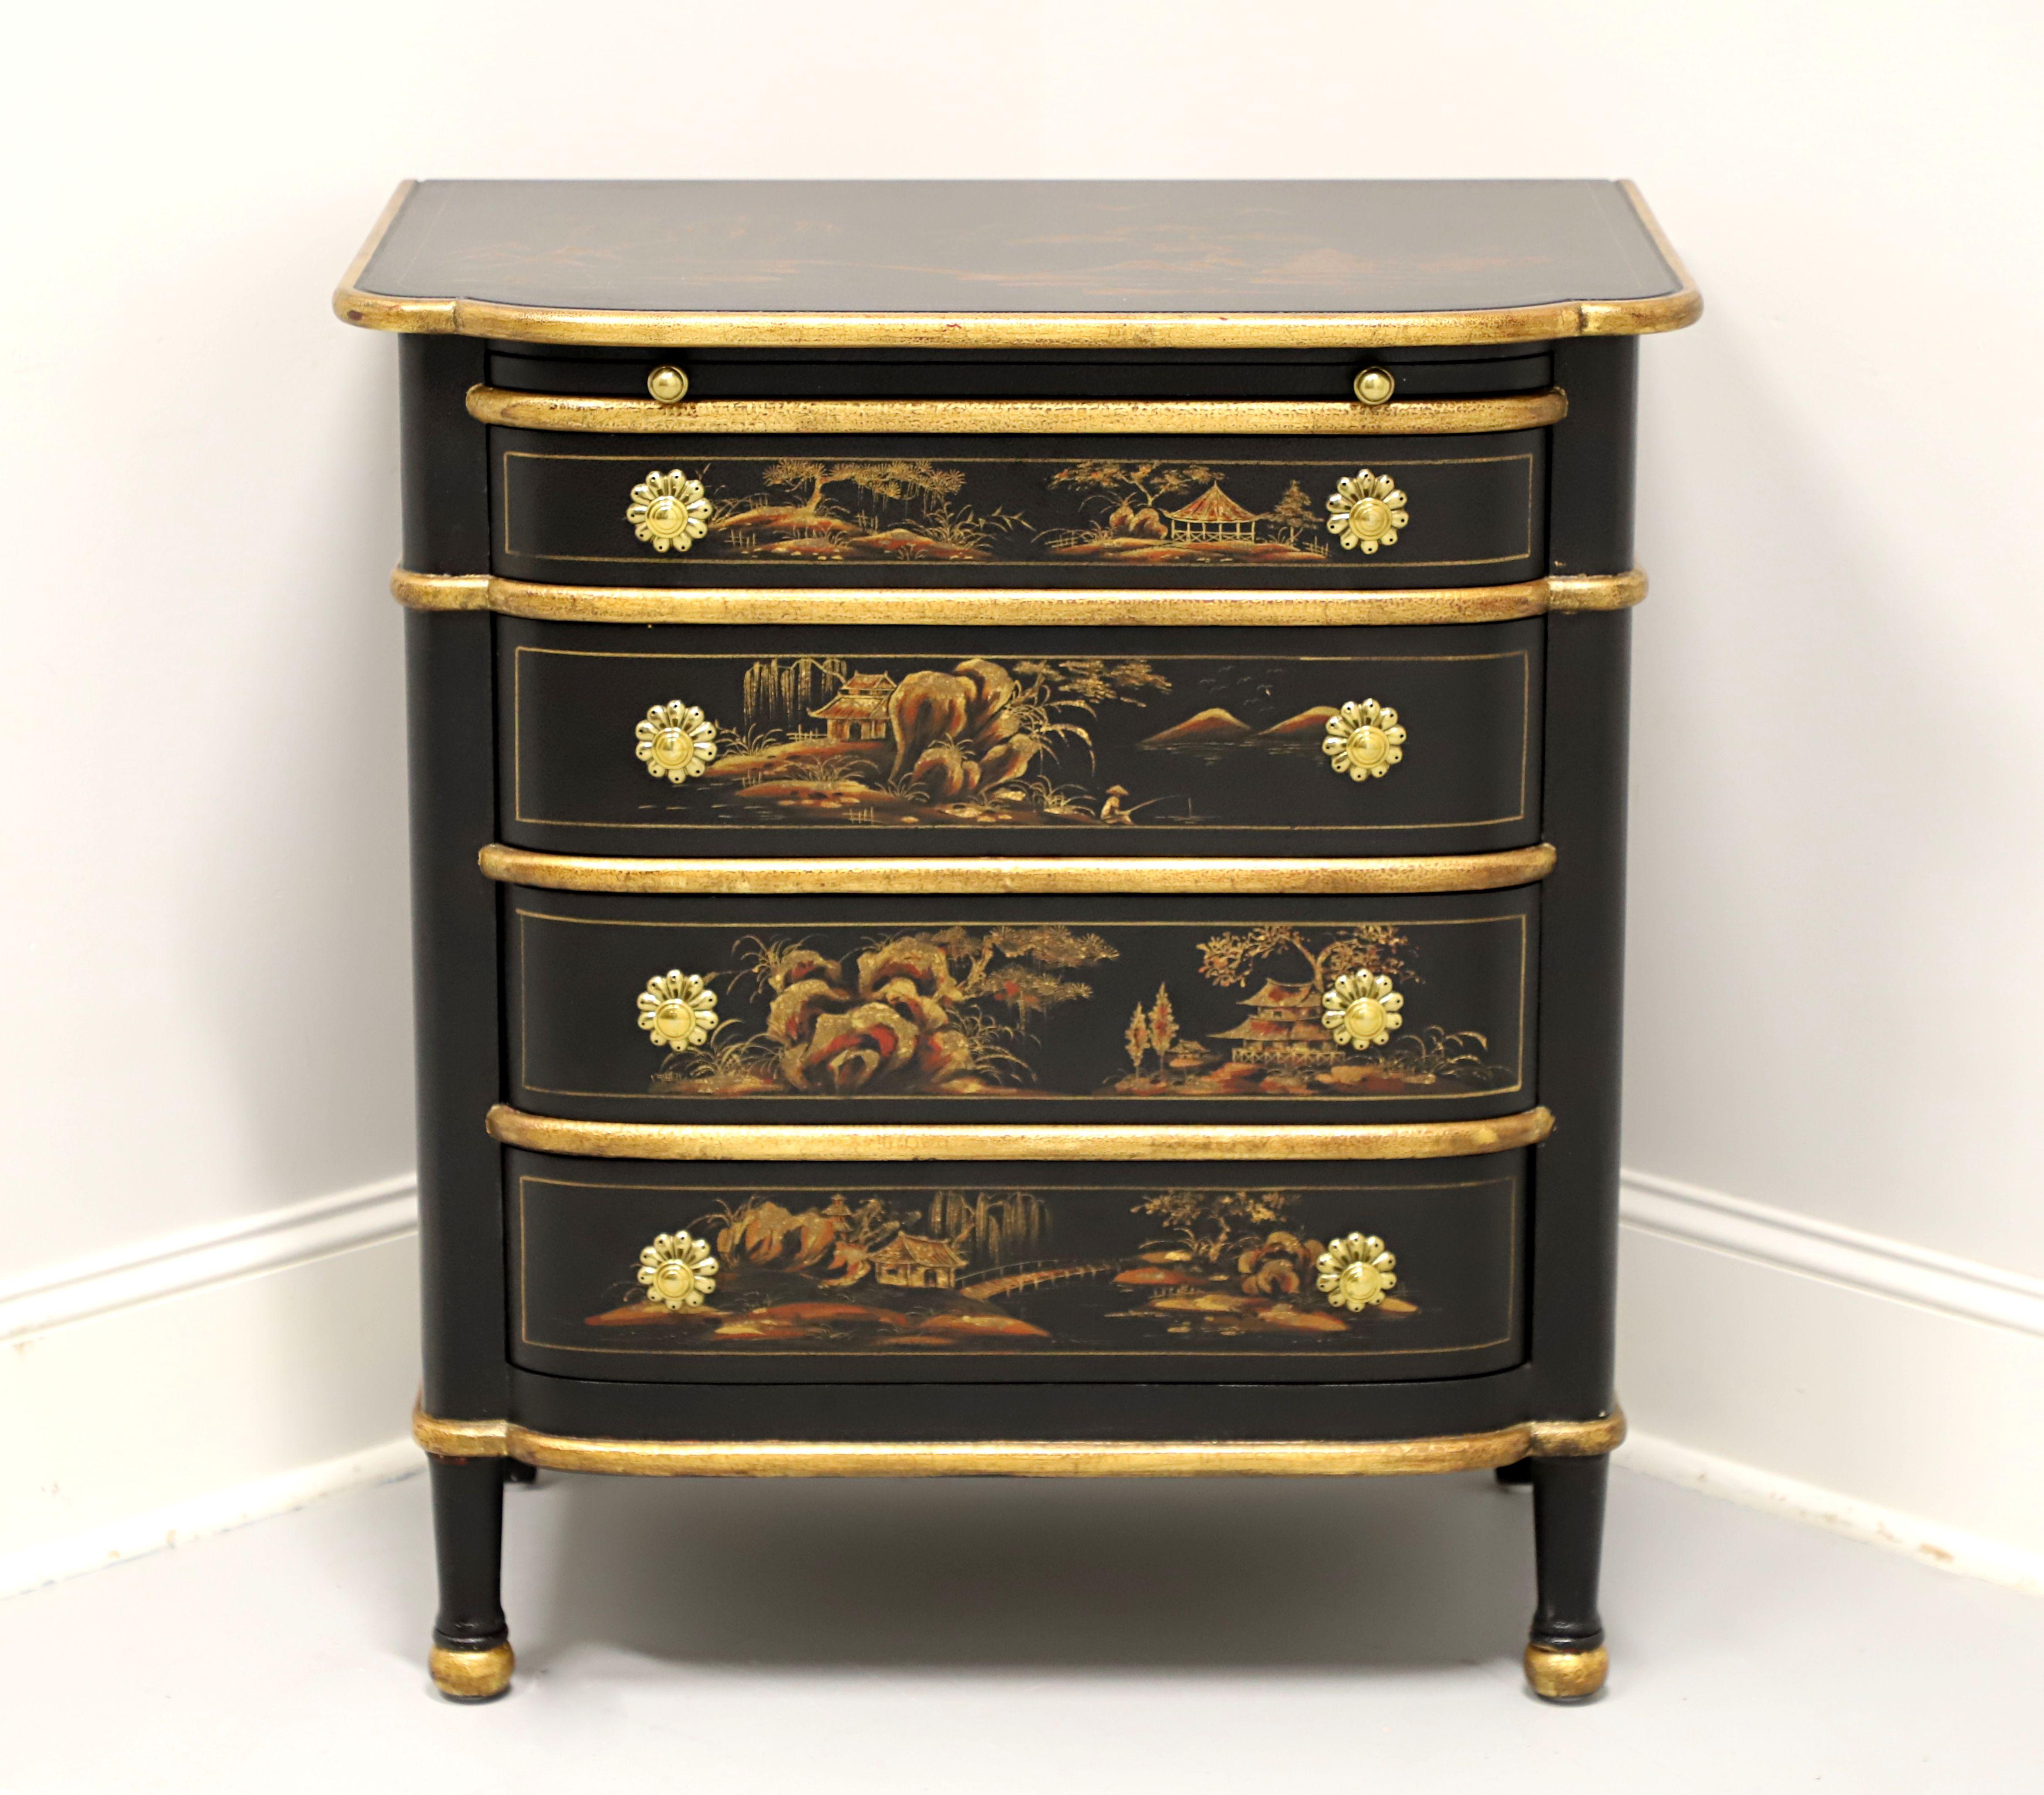 An Asian Chinoiserie style bedside chest, unbranded, similar in quality to Maitland Smith. Solid wood with a textured finish painted black, hand painted Chinoiserie scenes with gold accents, bullnose edge to top with hand painted Chinoiserie scene,